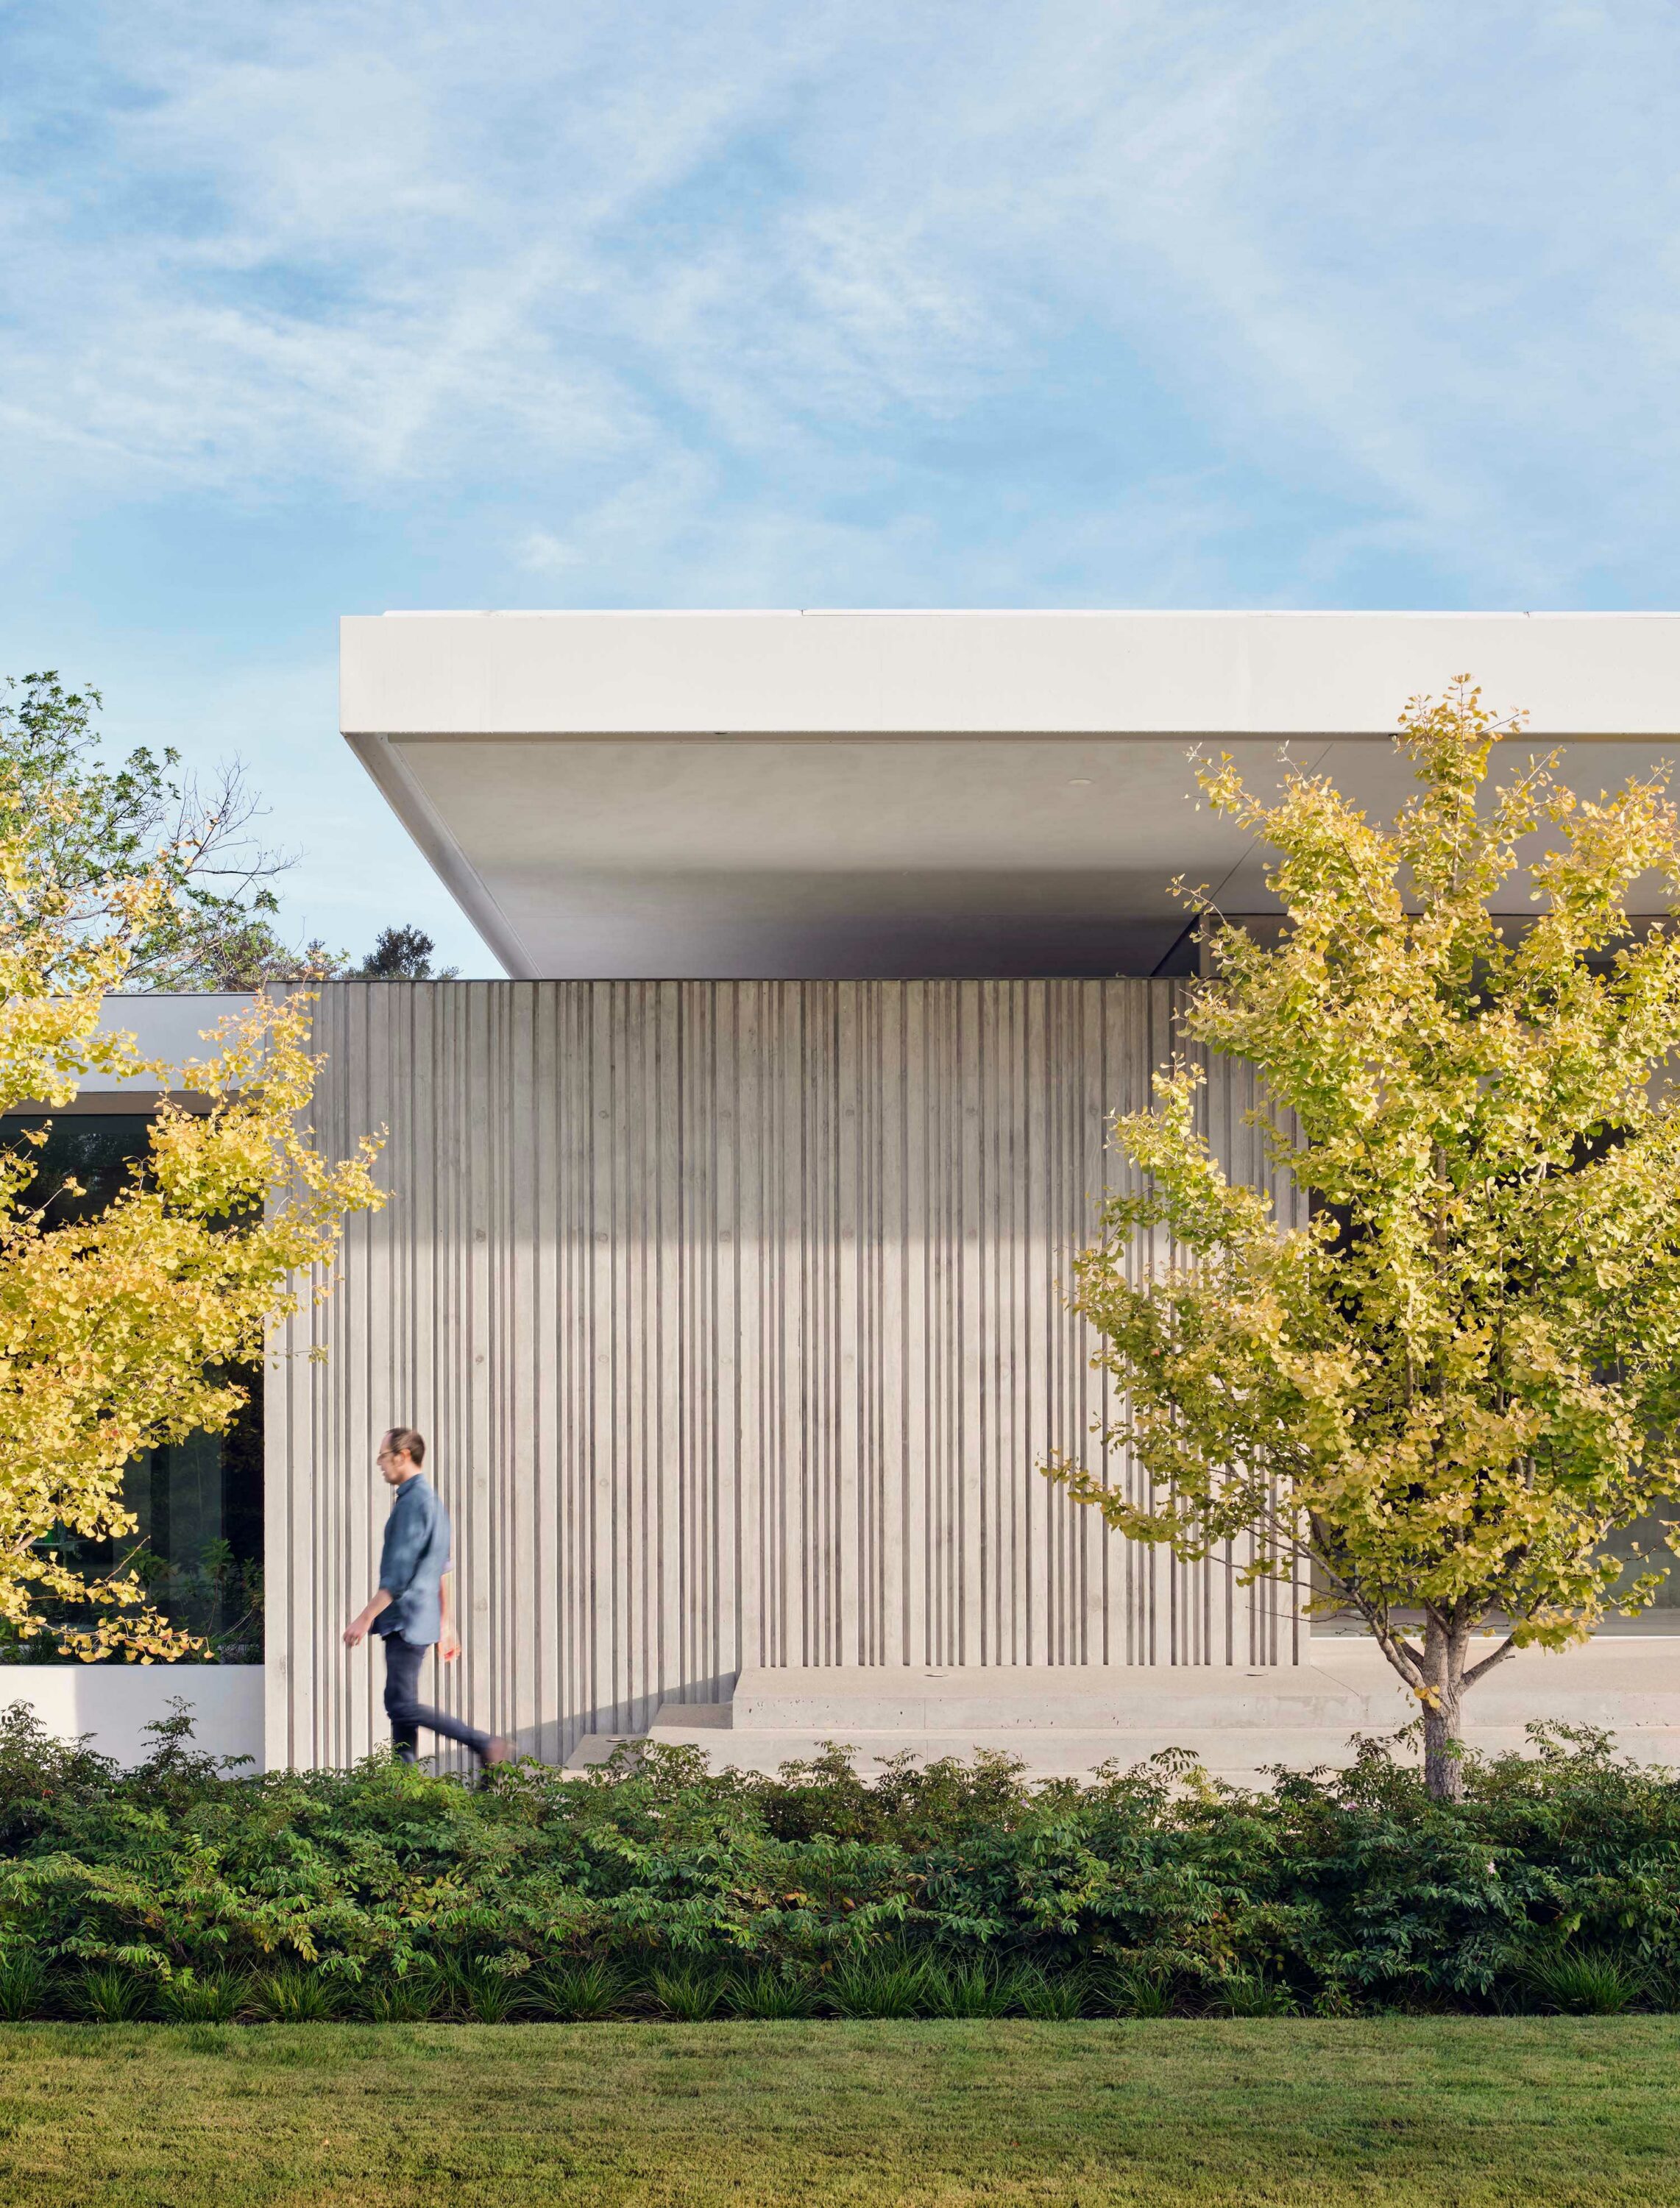 Exterior photo of the Preston Hollow Residence by Specht Novak Architects. Shot at by Manolo Langis, featuring trees, exterior concrete wall and extended floating roof.